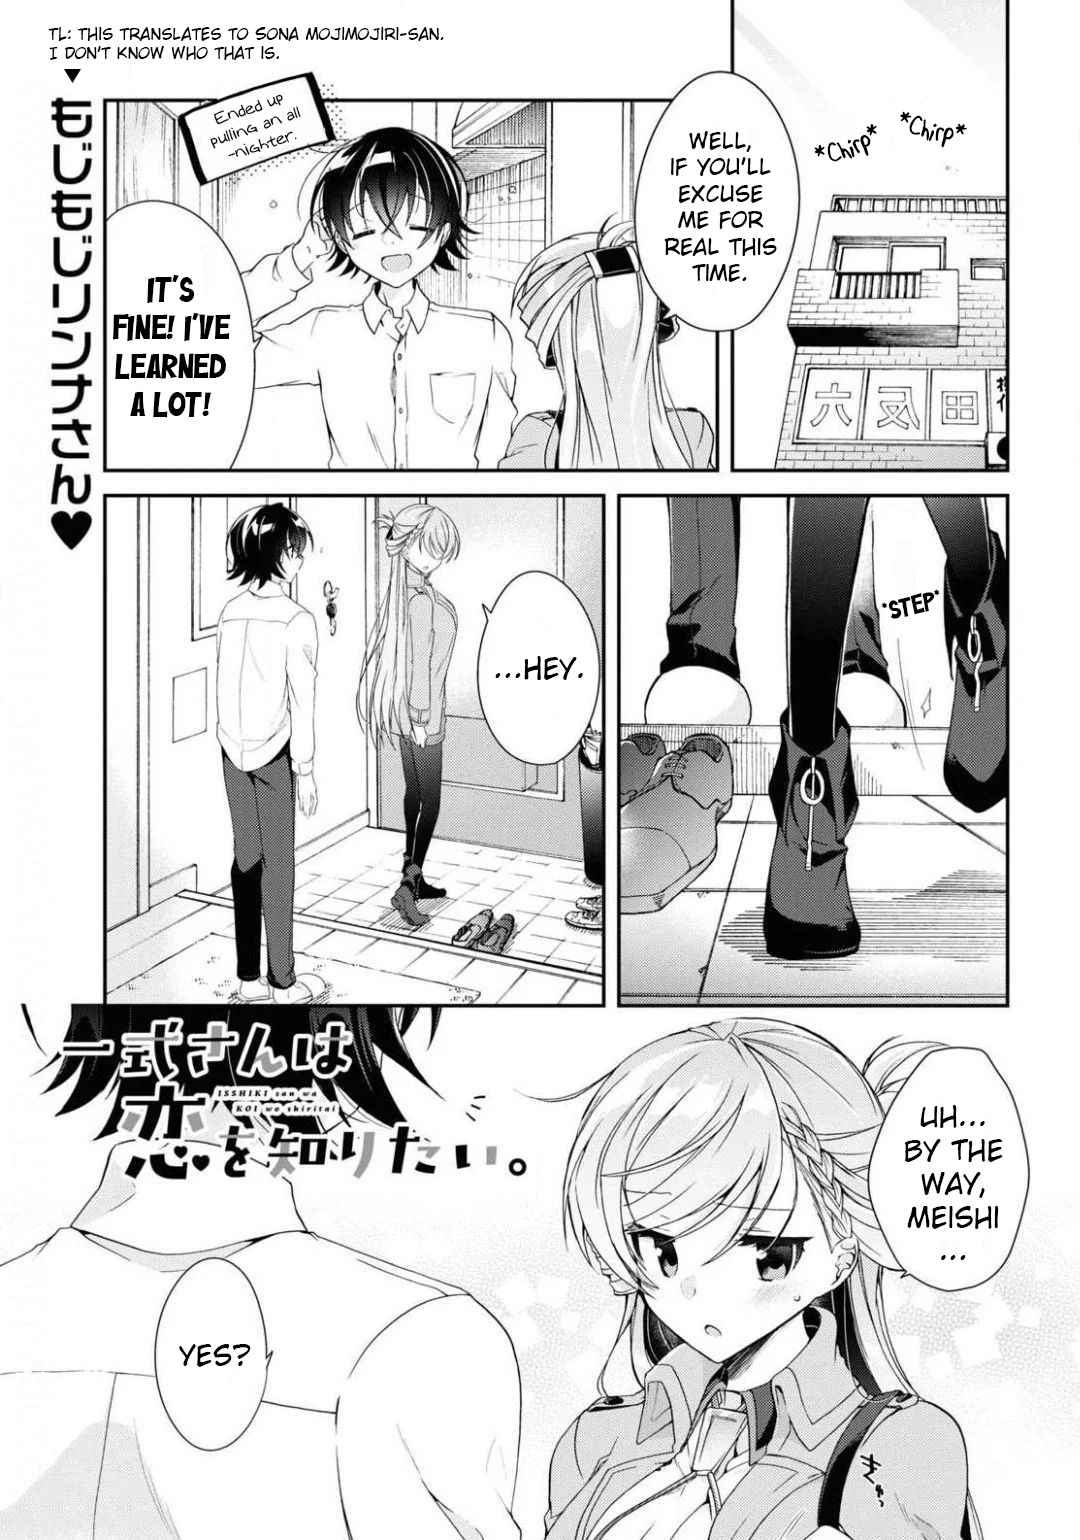 Isshiki-san Wants to Know About Love. - chapter 4 - #1